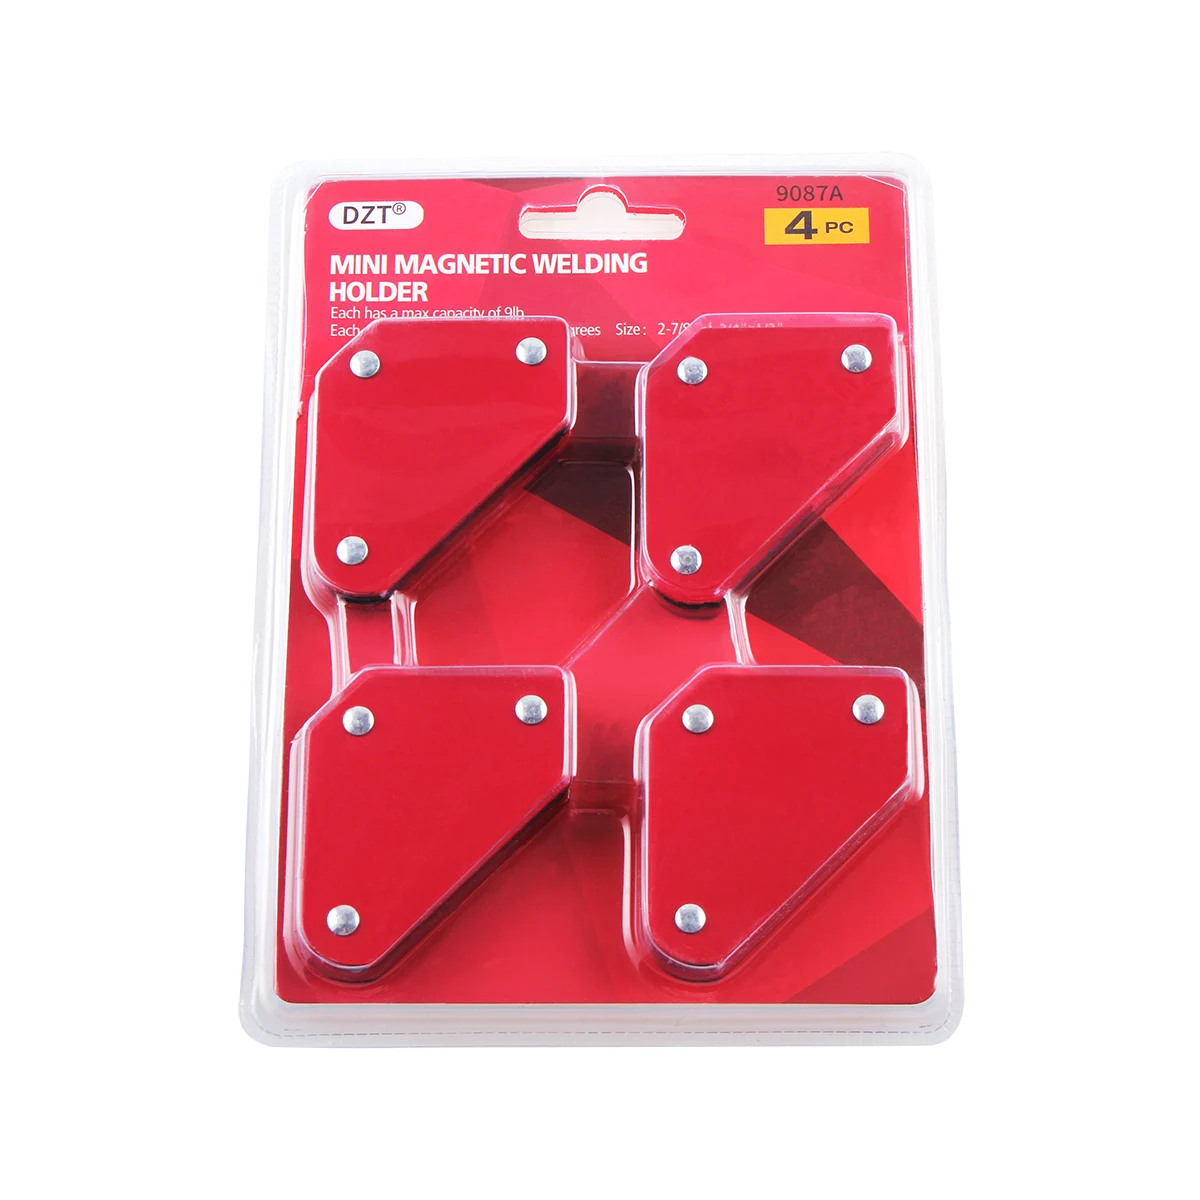 SMATO 4pc of Mini Magnetic Weld Holders Right Angle Soldering Welding Mag Square SWH-9M